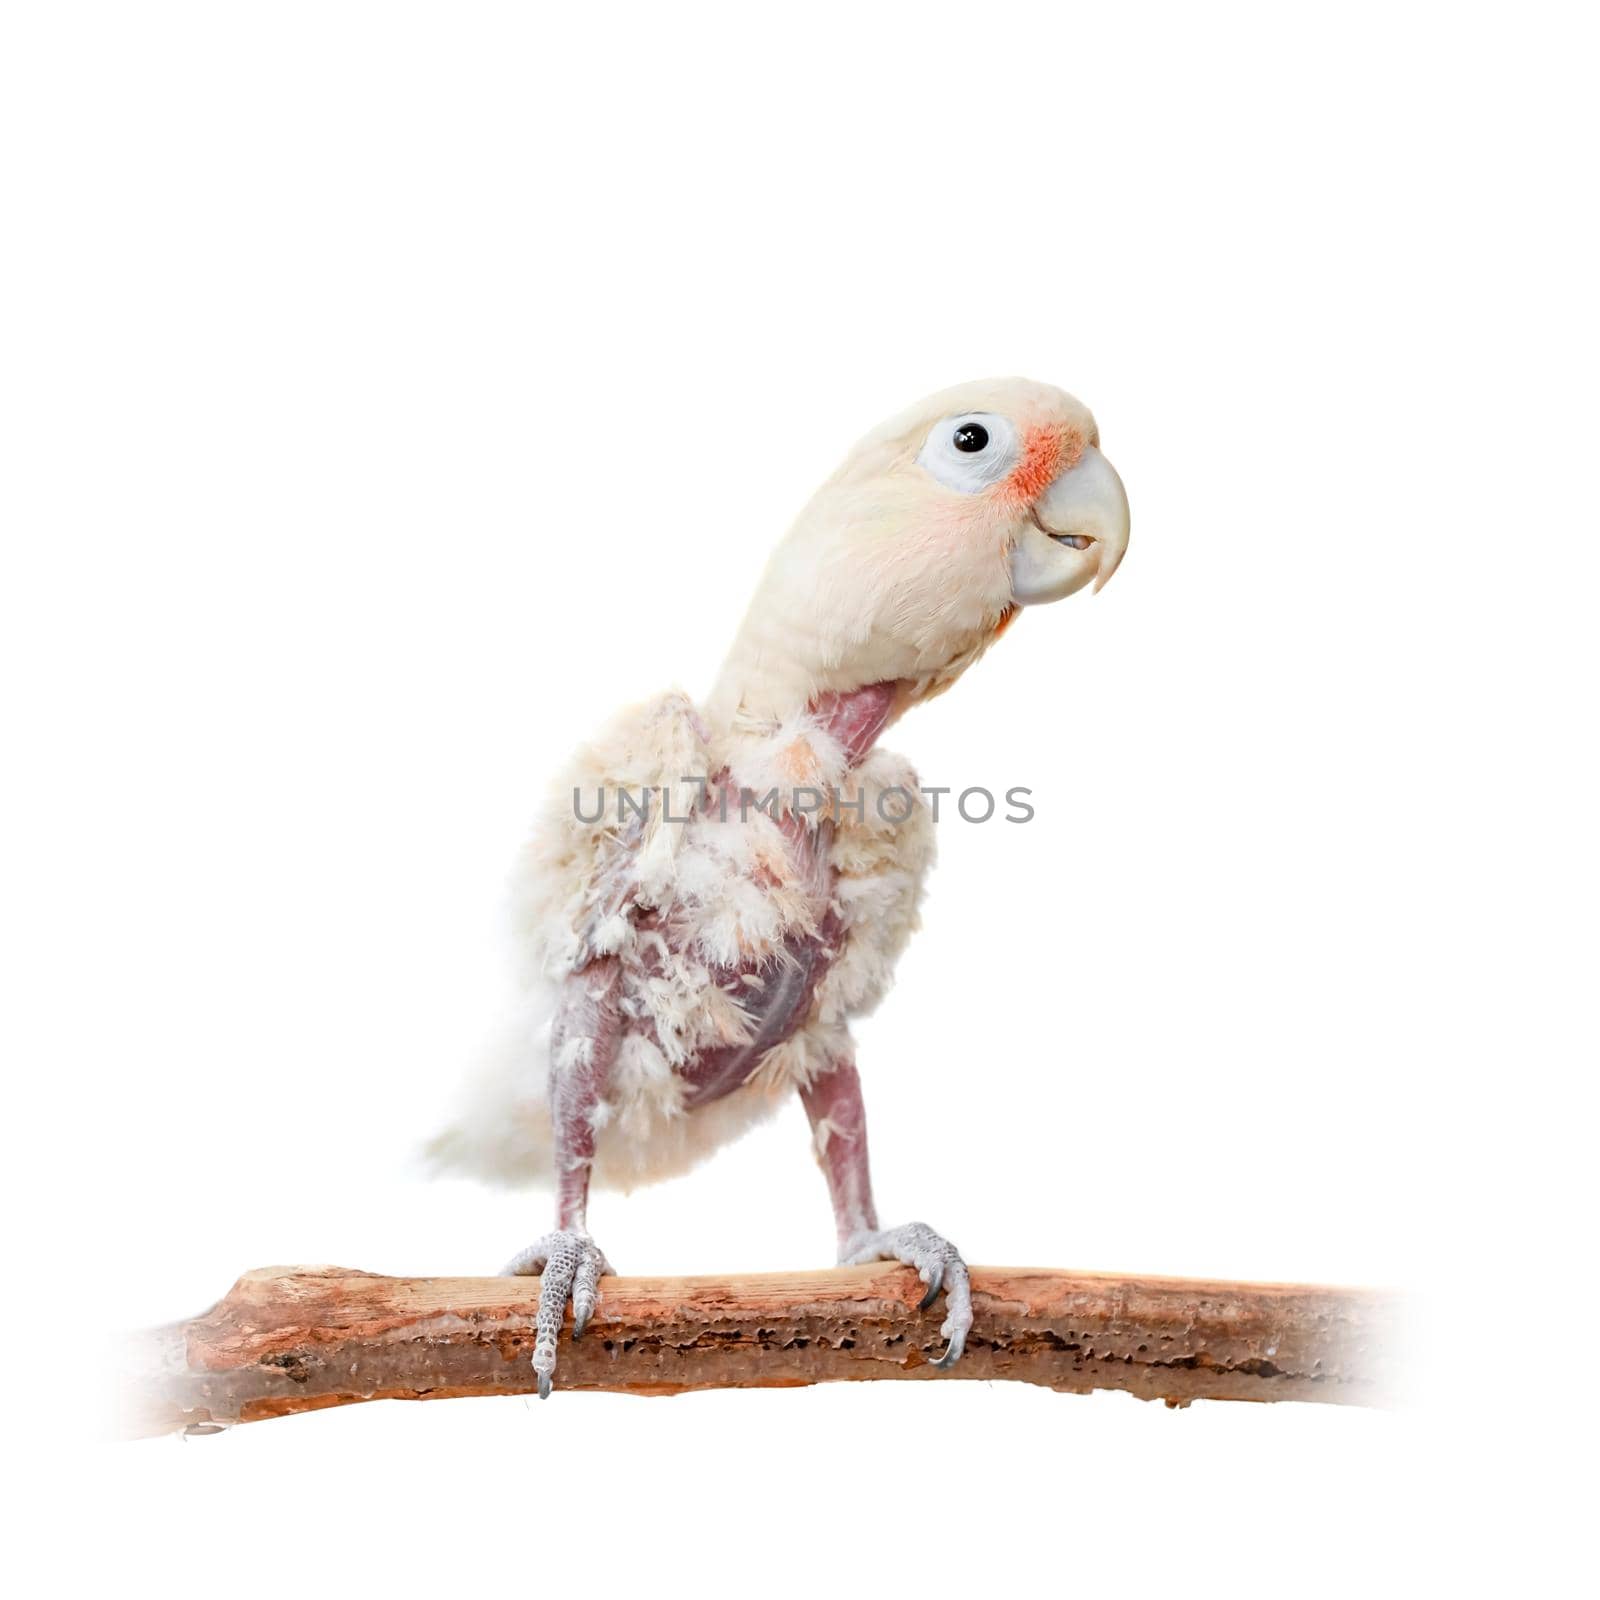 Tanimbar corella or Goffin's cockatoo on white by RosaJay